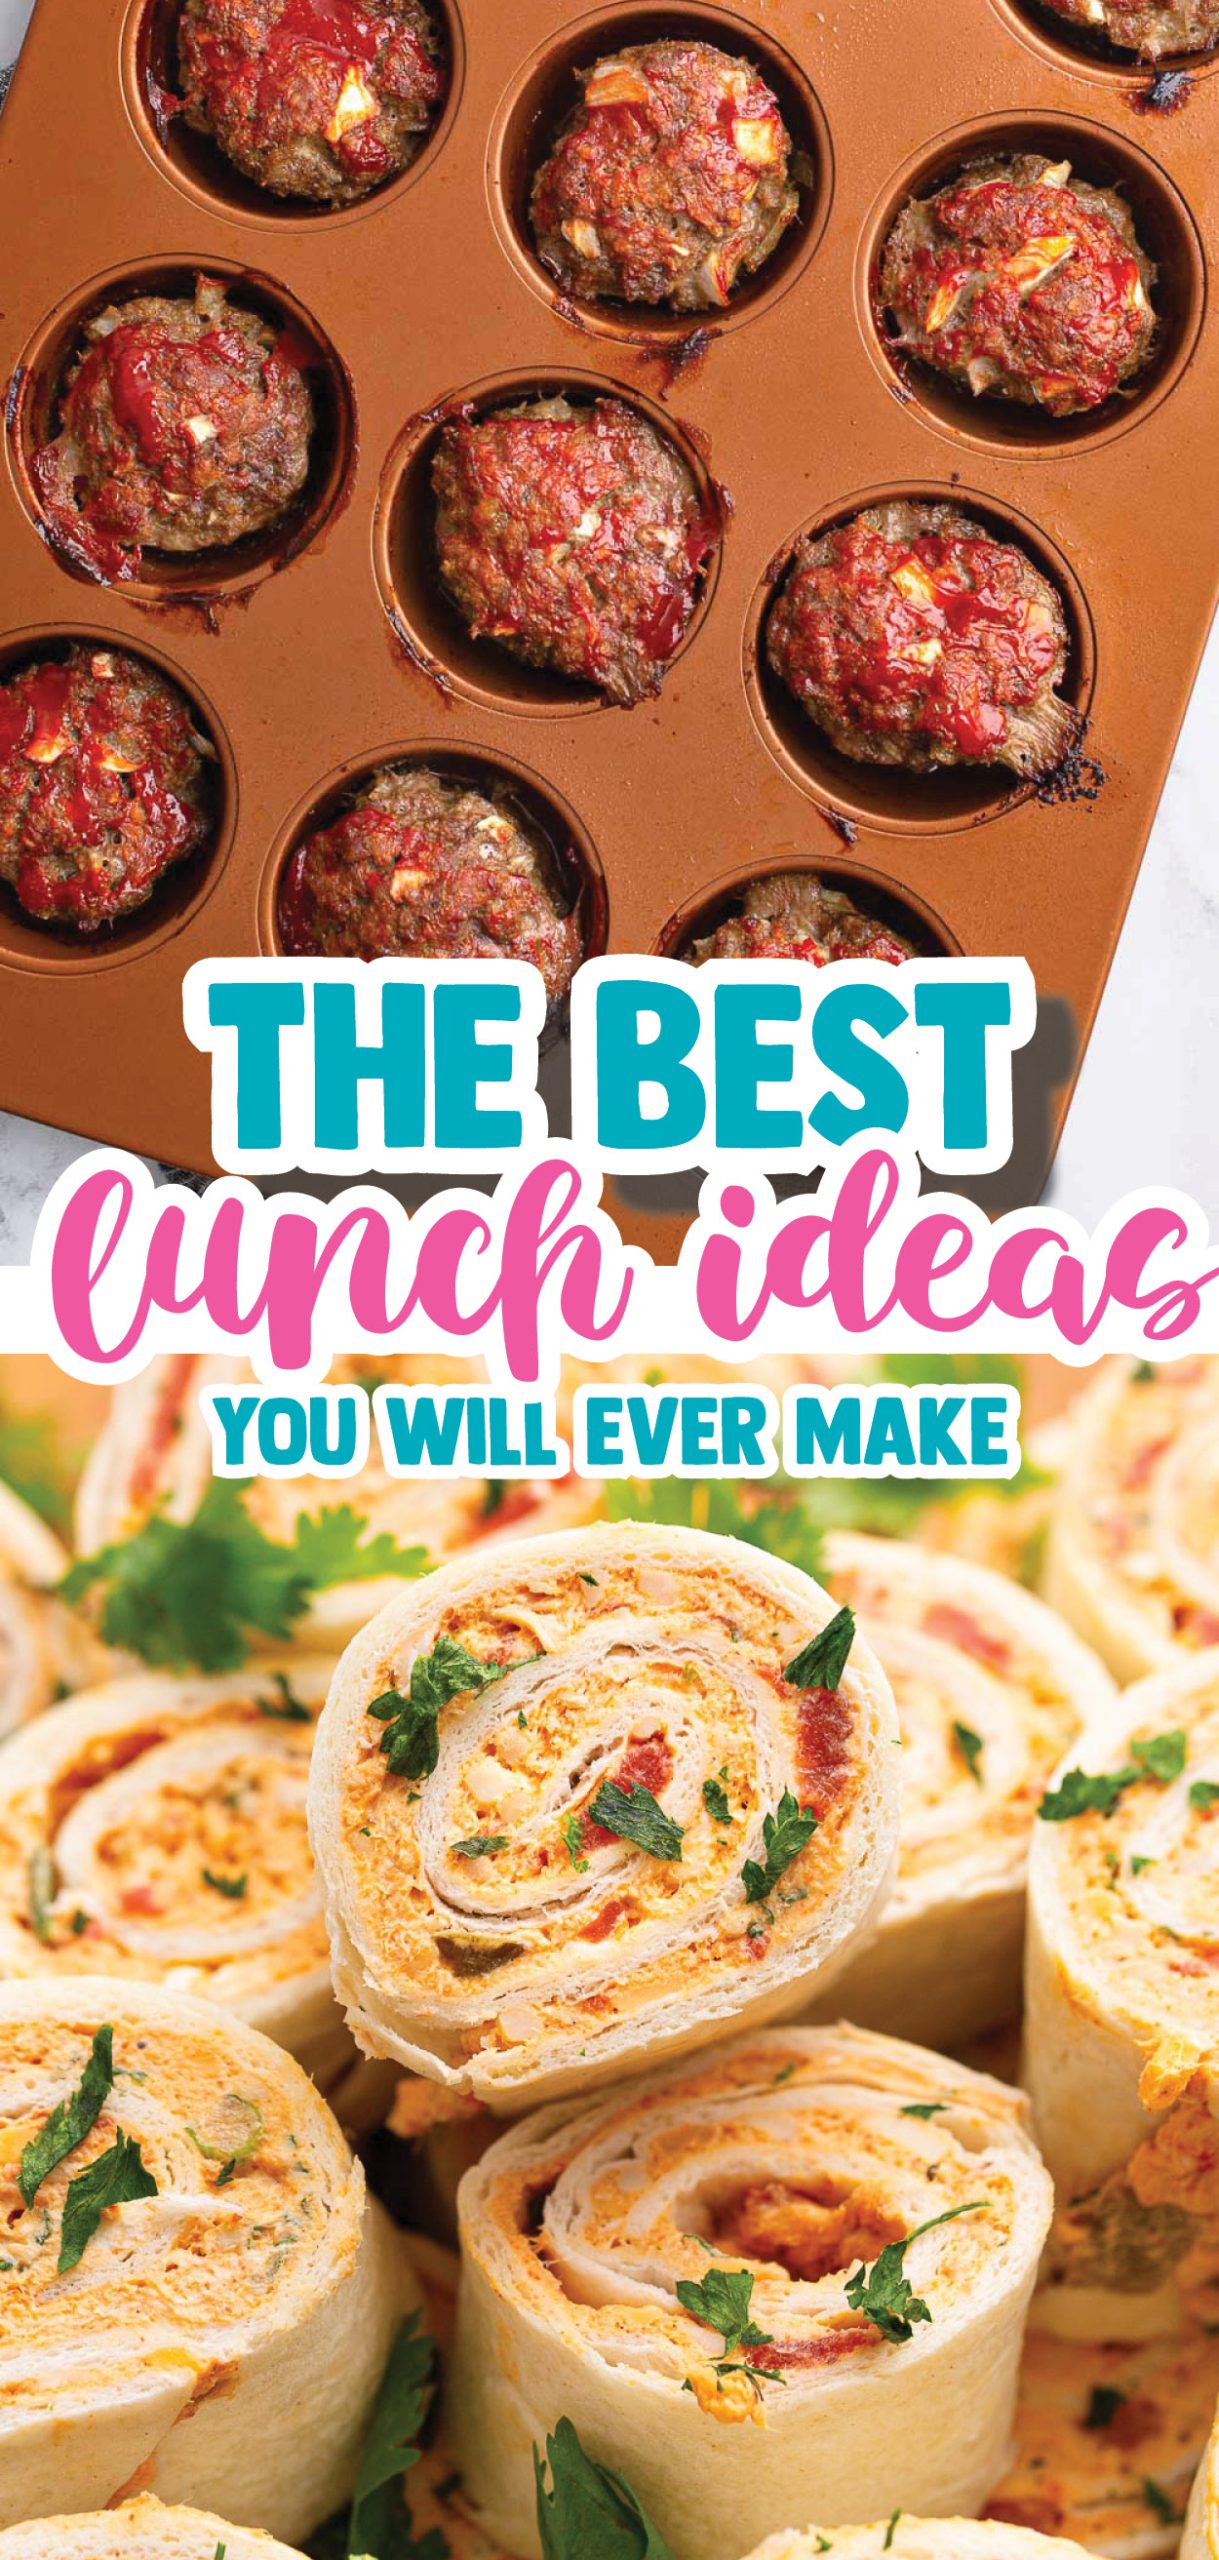 The BEST Lunch ideas you will ever make. Recipes for yourself, co-workers, and kids. New lunch ideas are always neat to see!